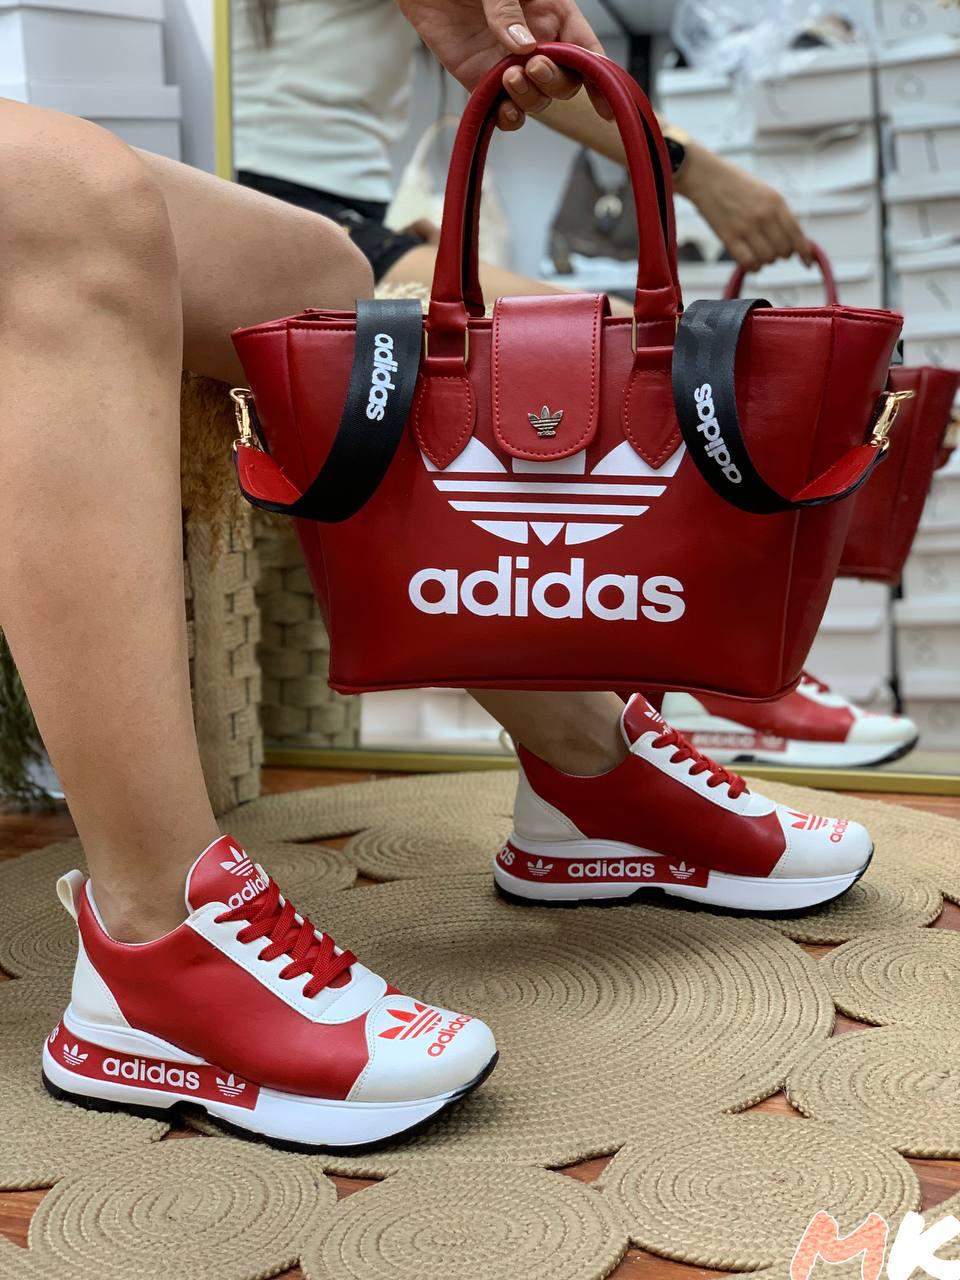 Adidas WIN Bag and Sneakers Set